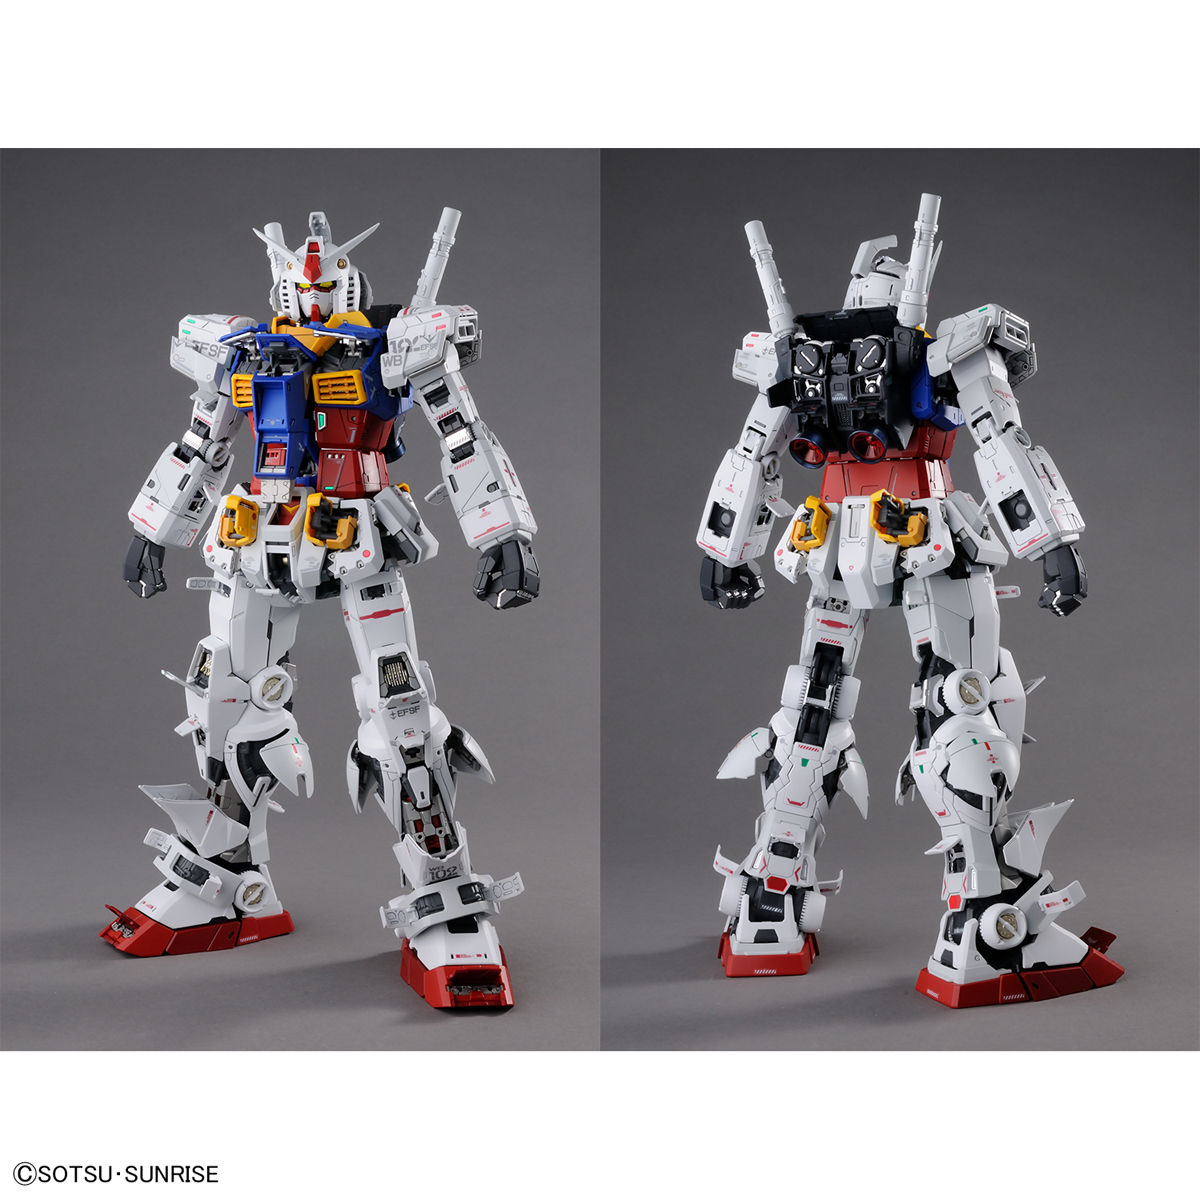 PG UNLEASHED - HOBBY KIT 1/60 - RX-78-2 GUNDAM  (REPEAT) **PRE-ORDER**